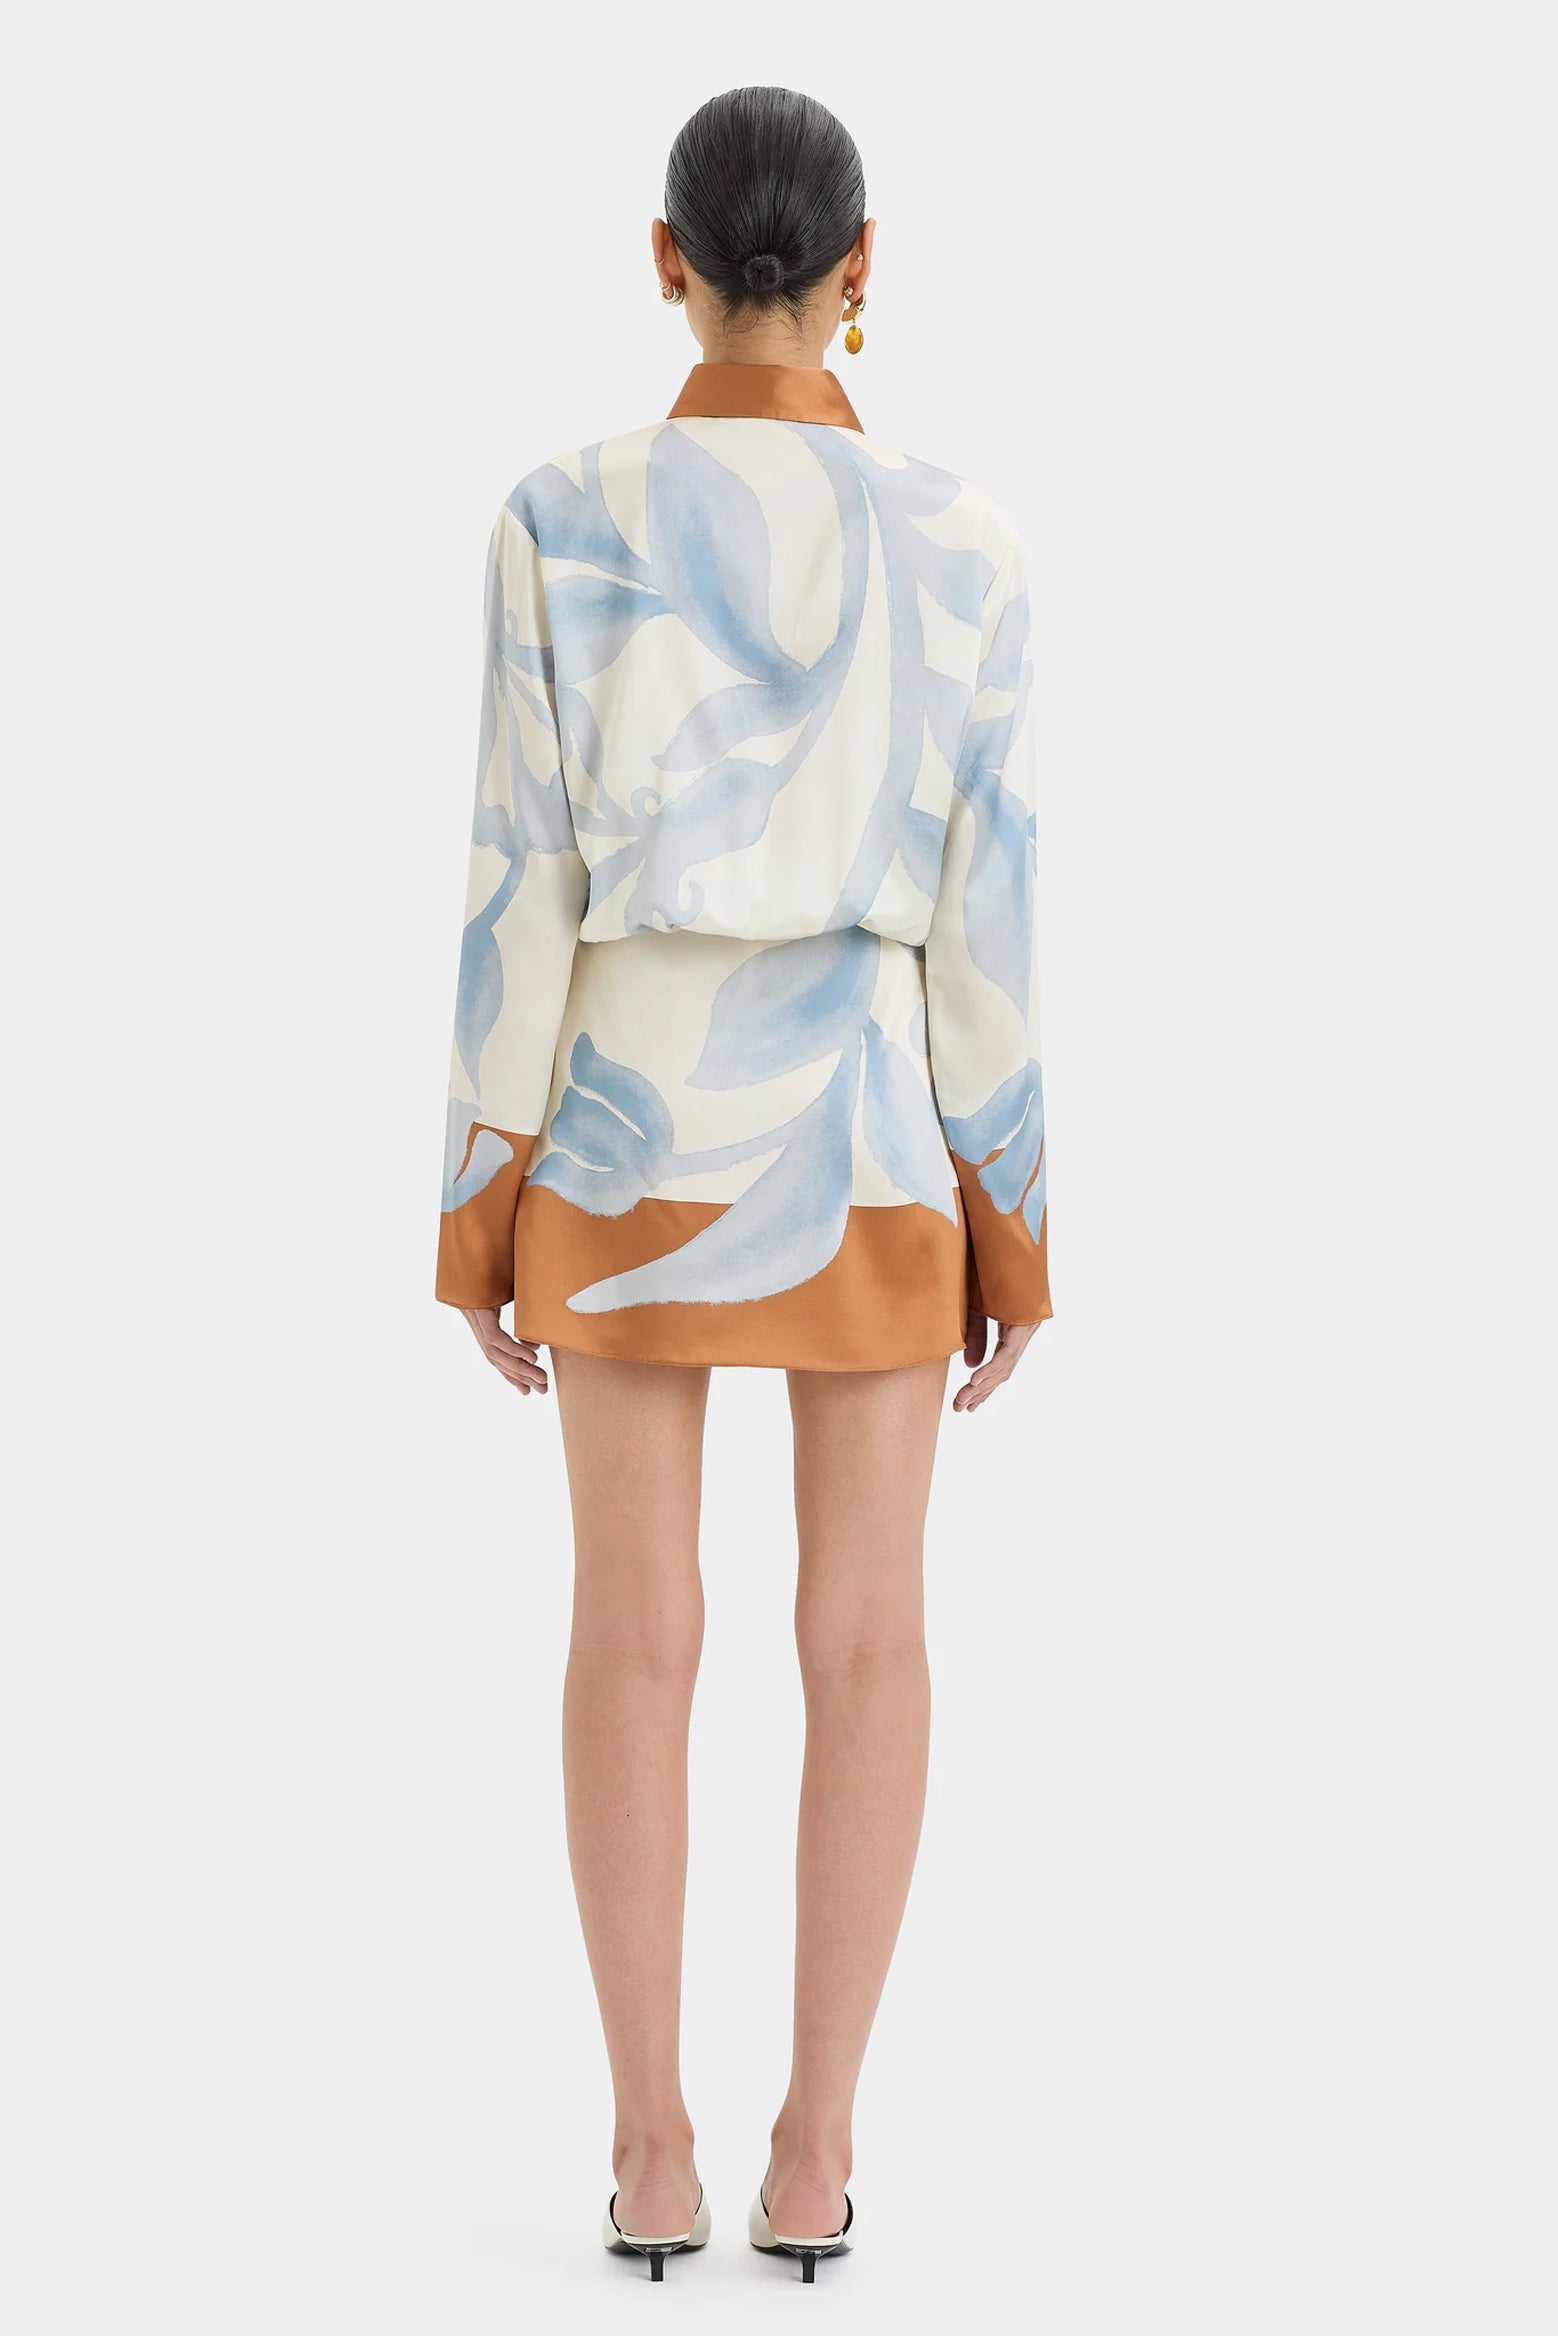 SIR Sorrento Shirtdress in Sciarpa Print available at The New Trend Australia.